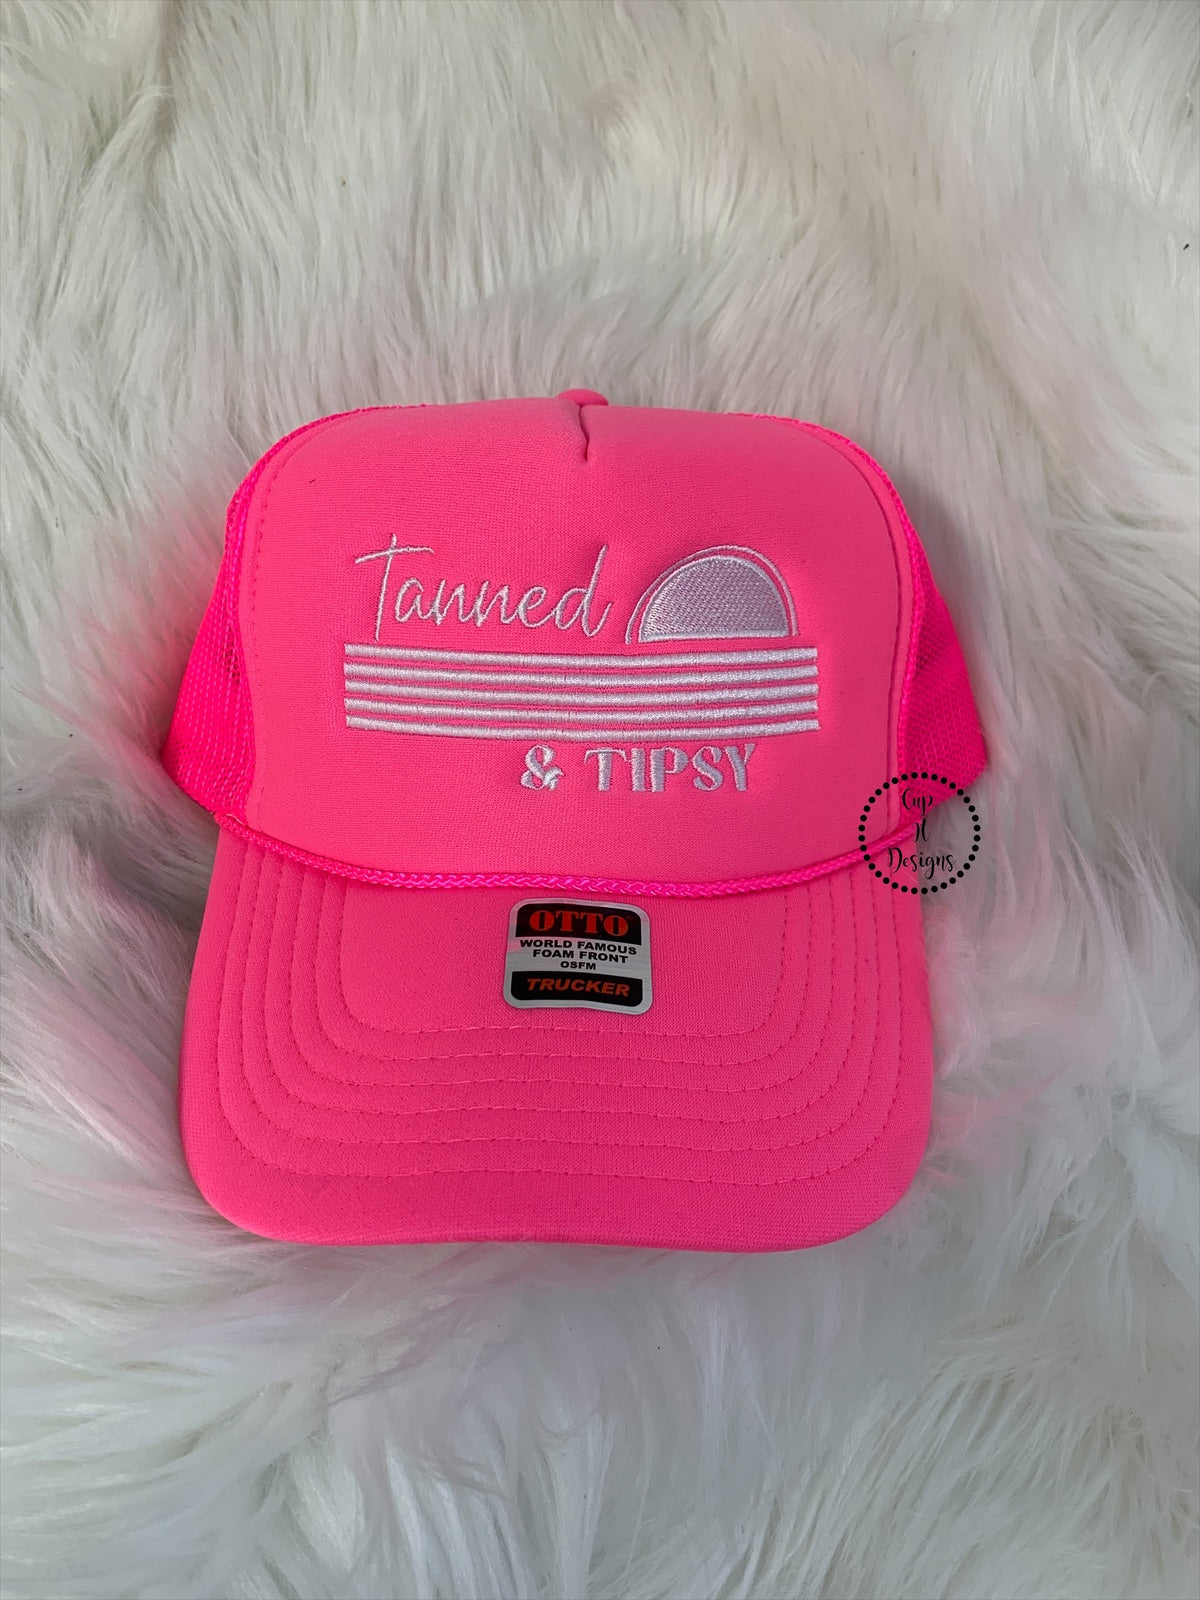 Tanner and Tipsy Trucker Hat